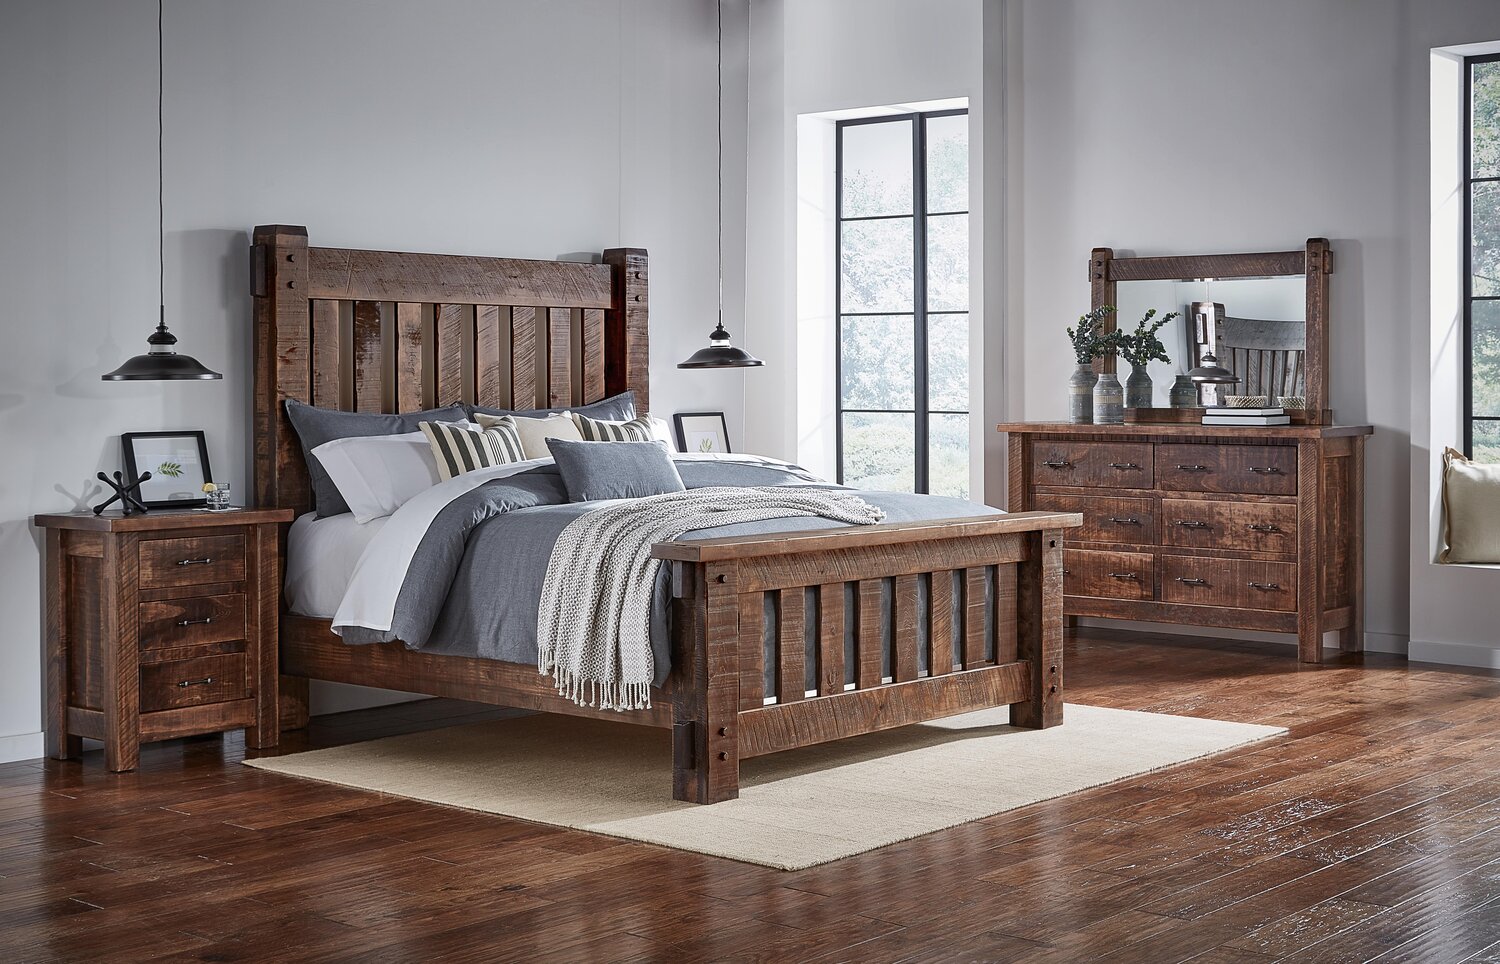 Amish Solid Wood Bedroom Furniture — Countrywood Accents | atelier-yuwa ...